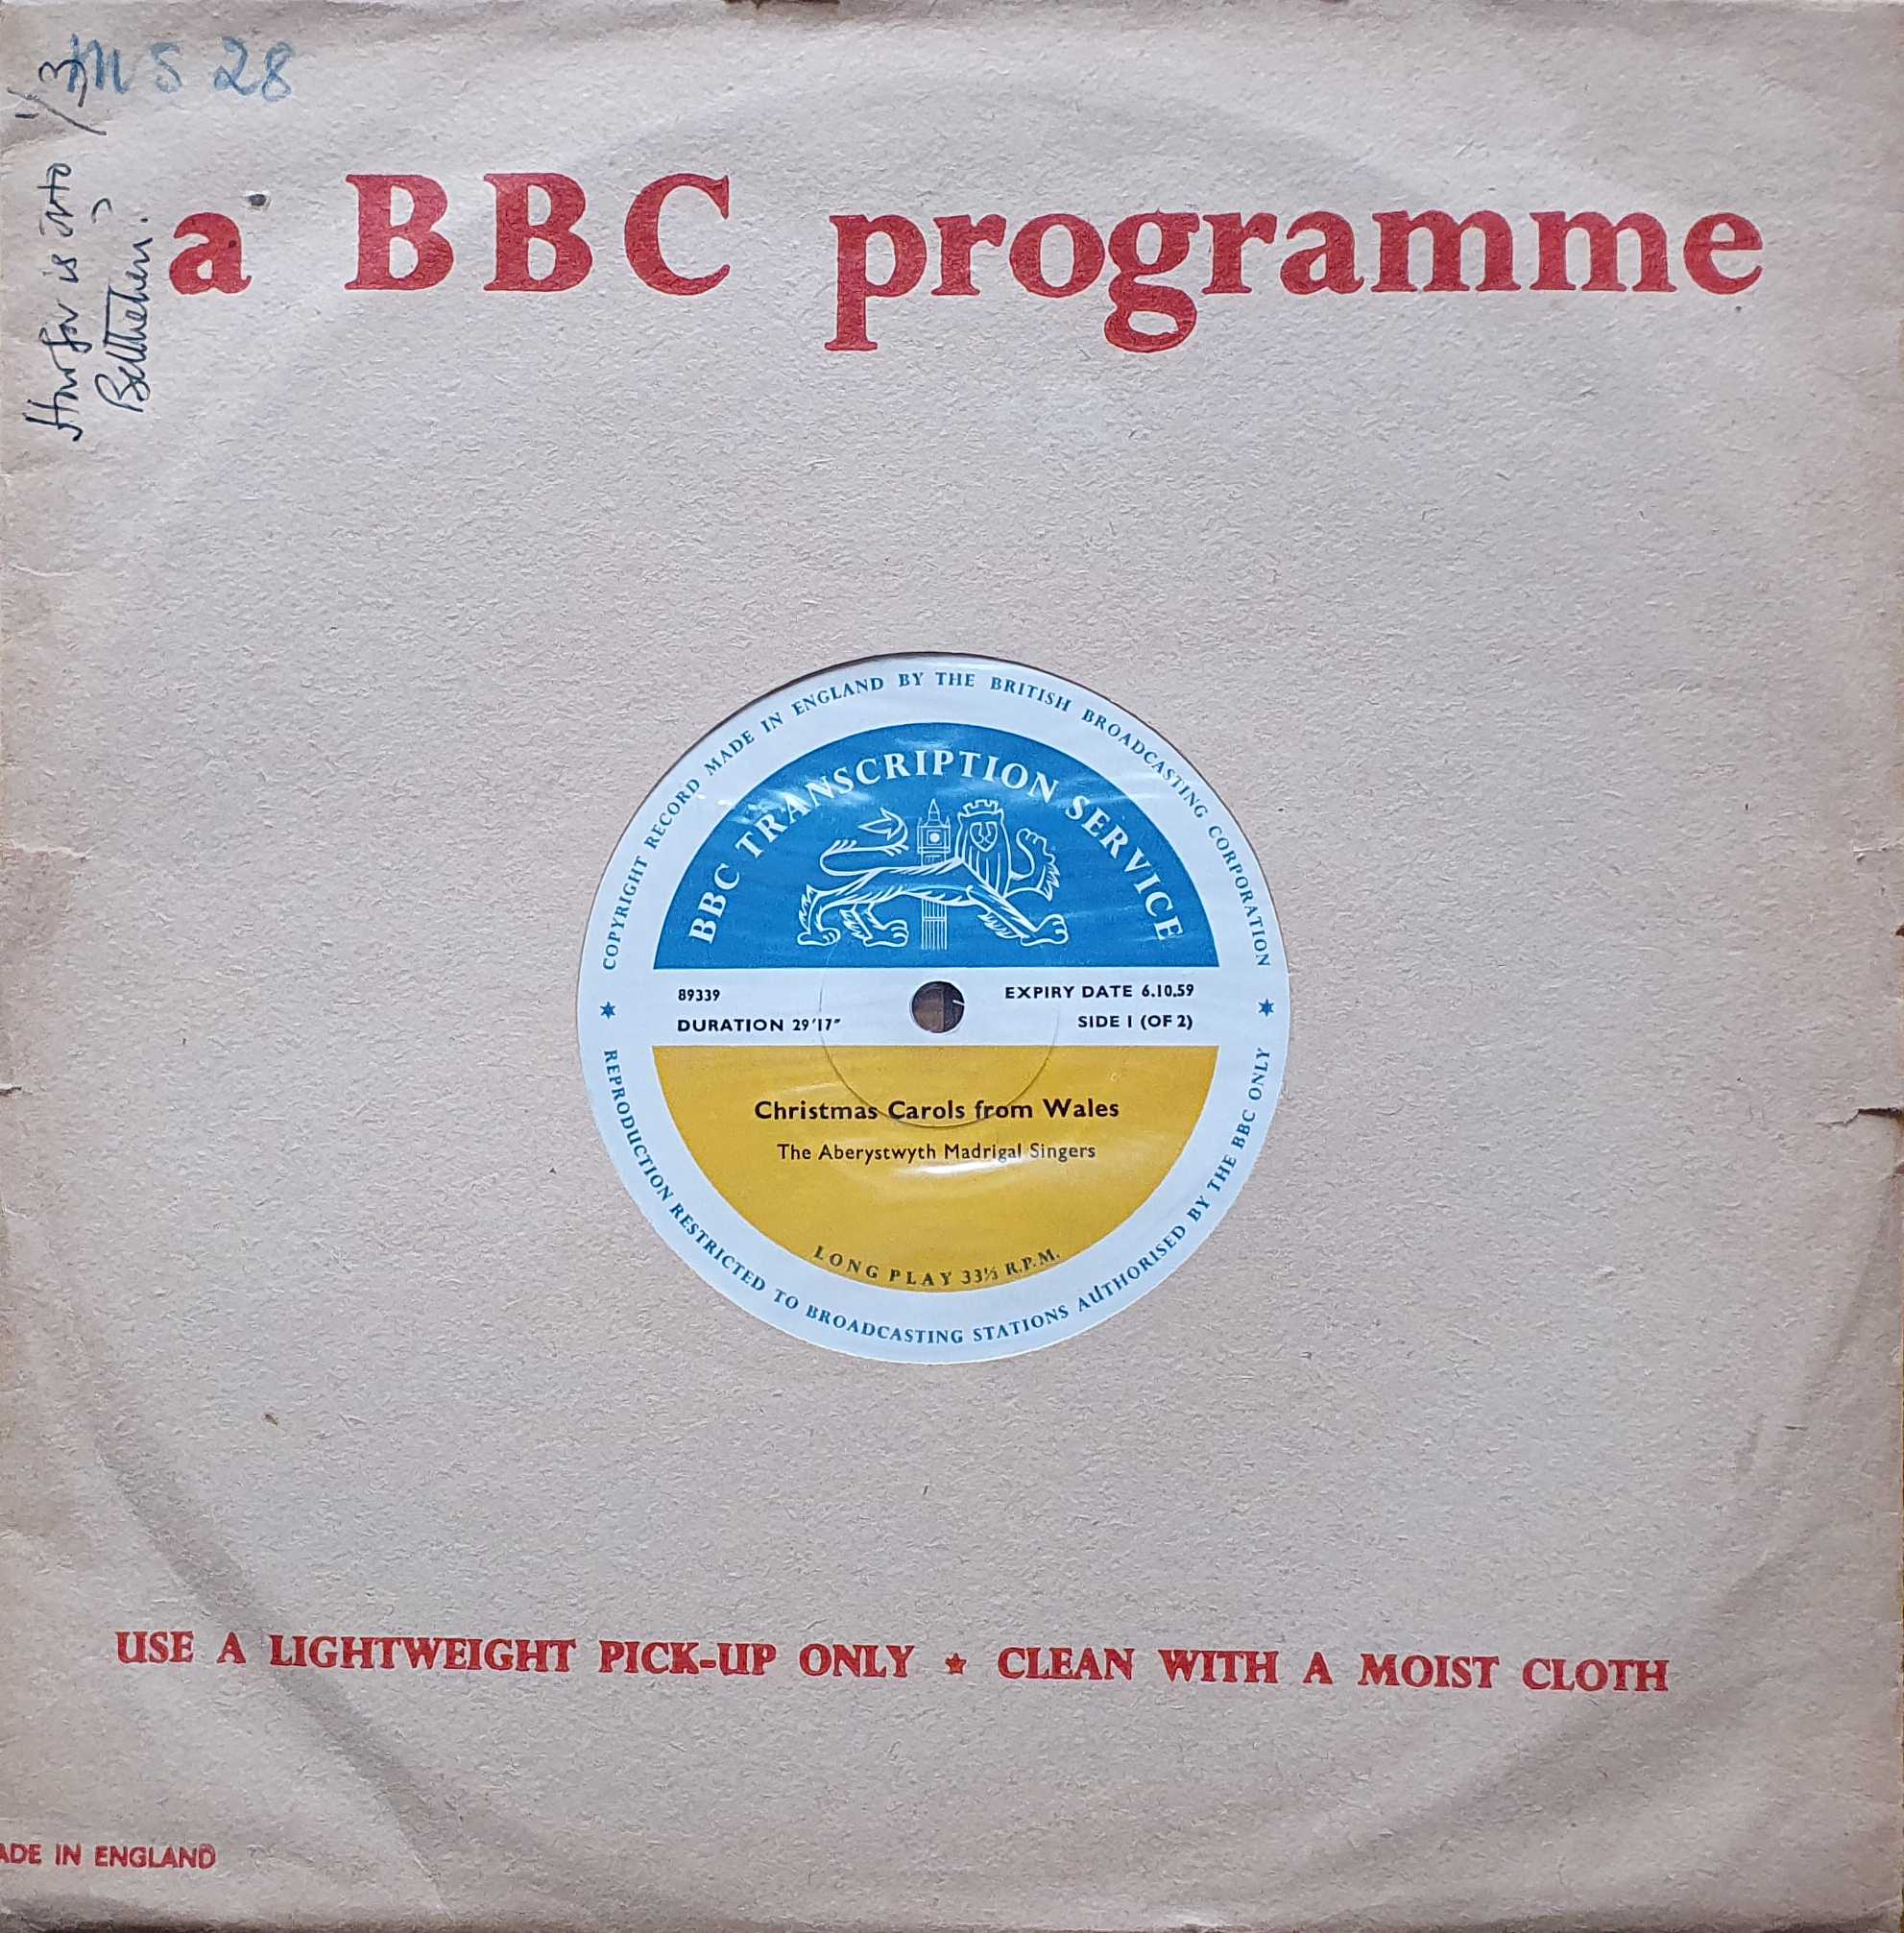 Picture of Christmas carols from Wales (Side 1 of 2) / How far is it to Bethlehem? (Side 1 of 2) by artist Various from the BBC 10inches - Records and Tapes library